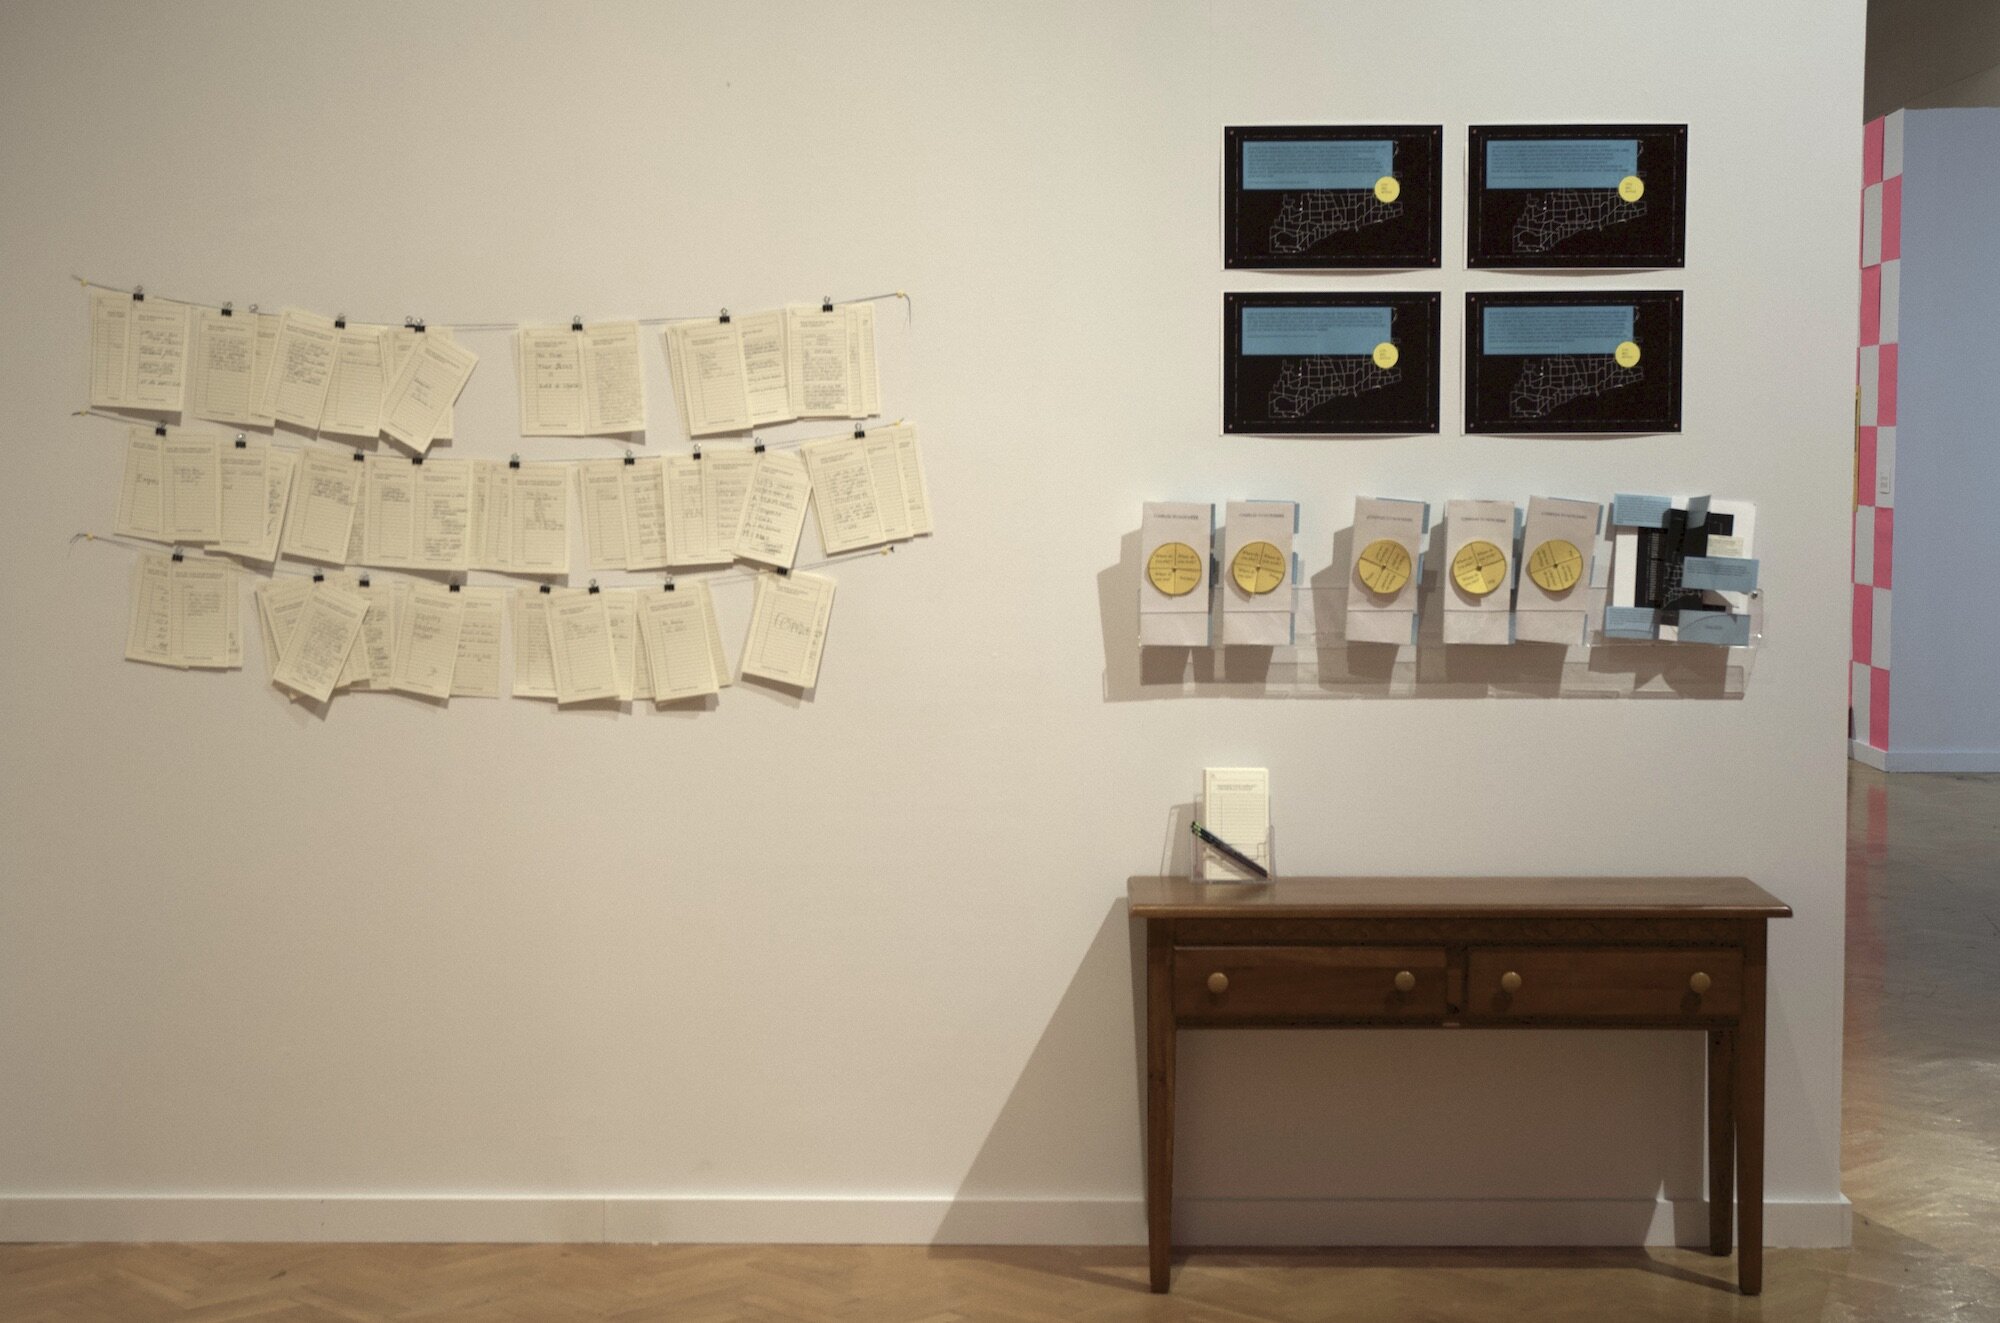  Installation view of work by Silvia Gonzalez with Joseph Josue Mora  and Patricia Nguyen. 